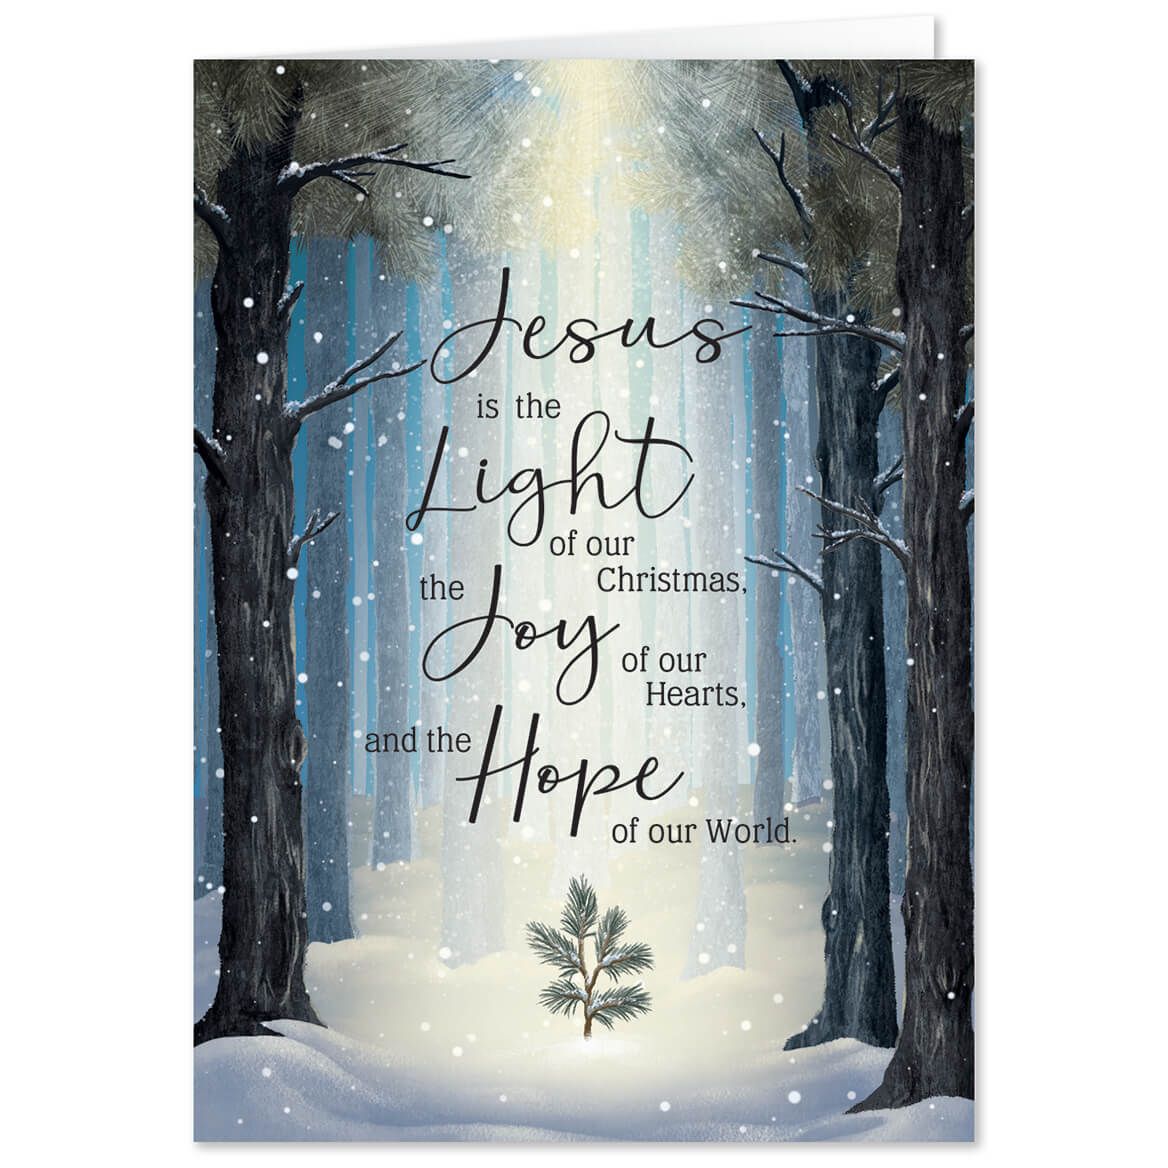 Personalized 'He Is the Light' Christmas Card Set of 20 + '-' + 368237